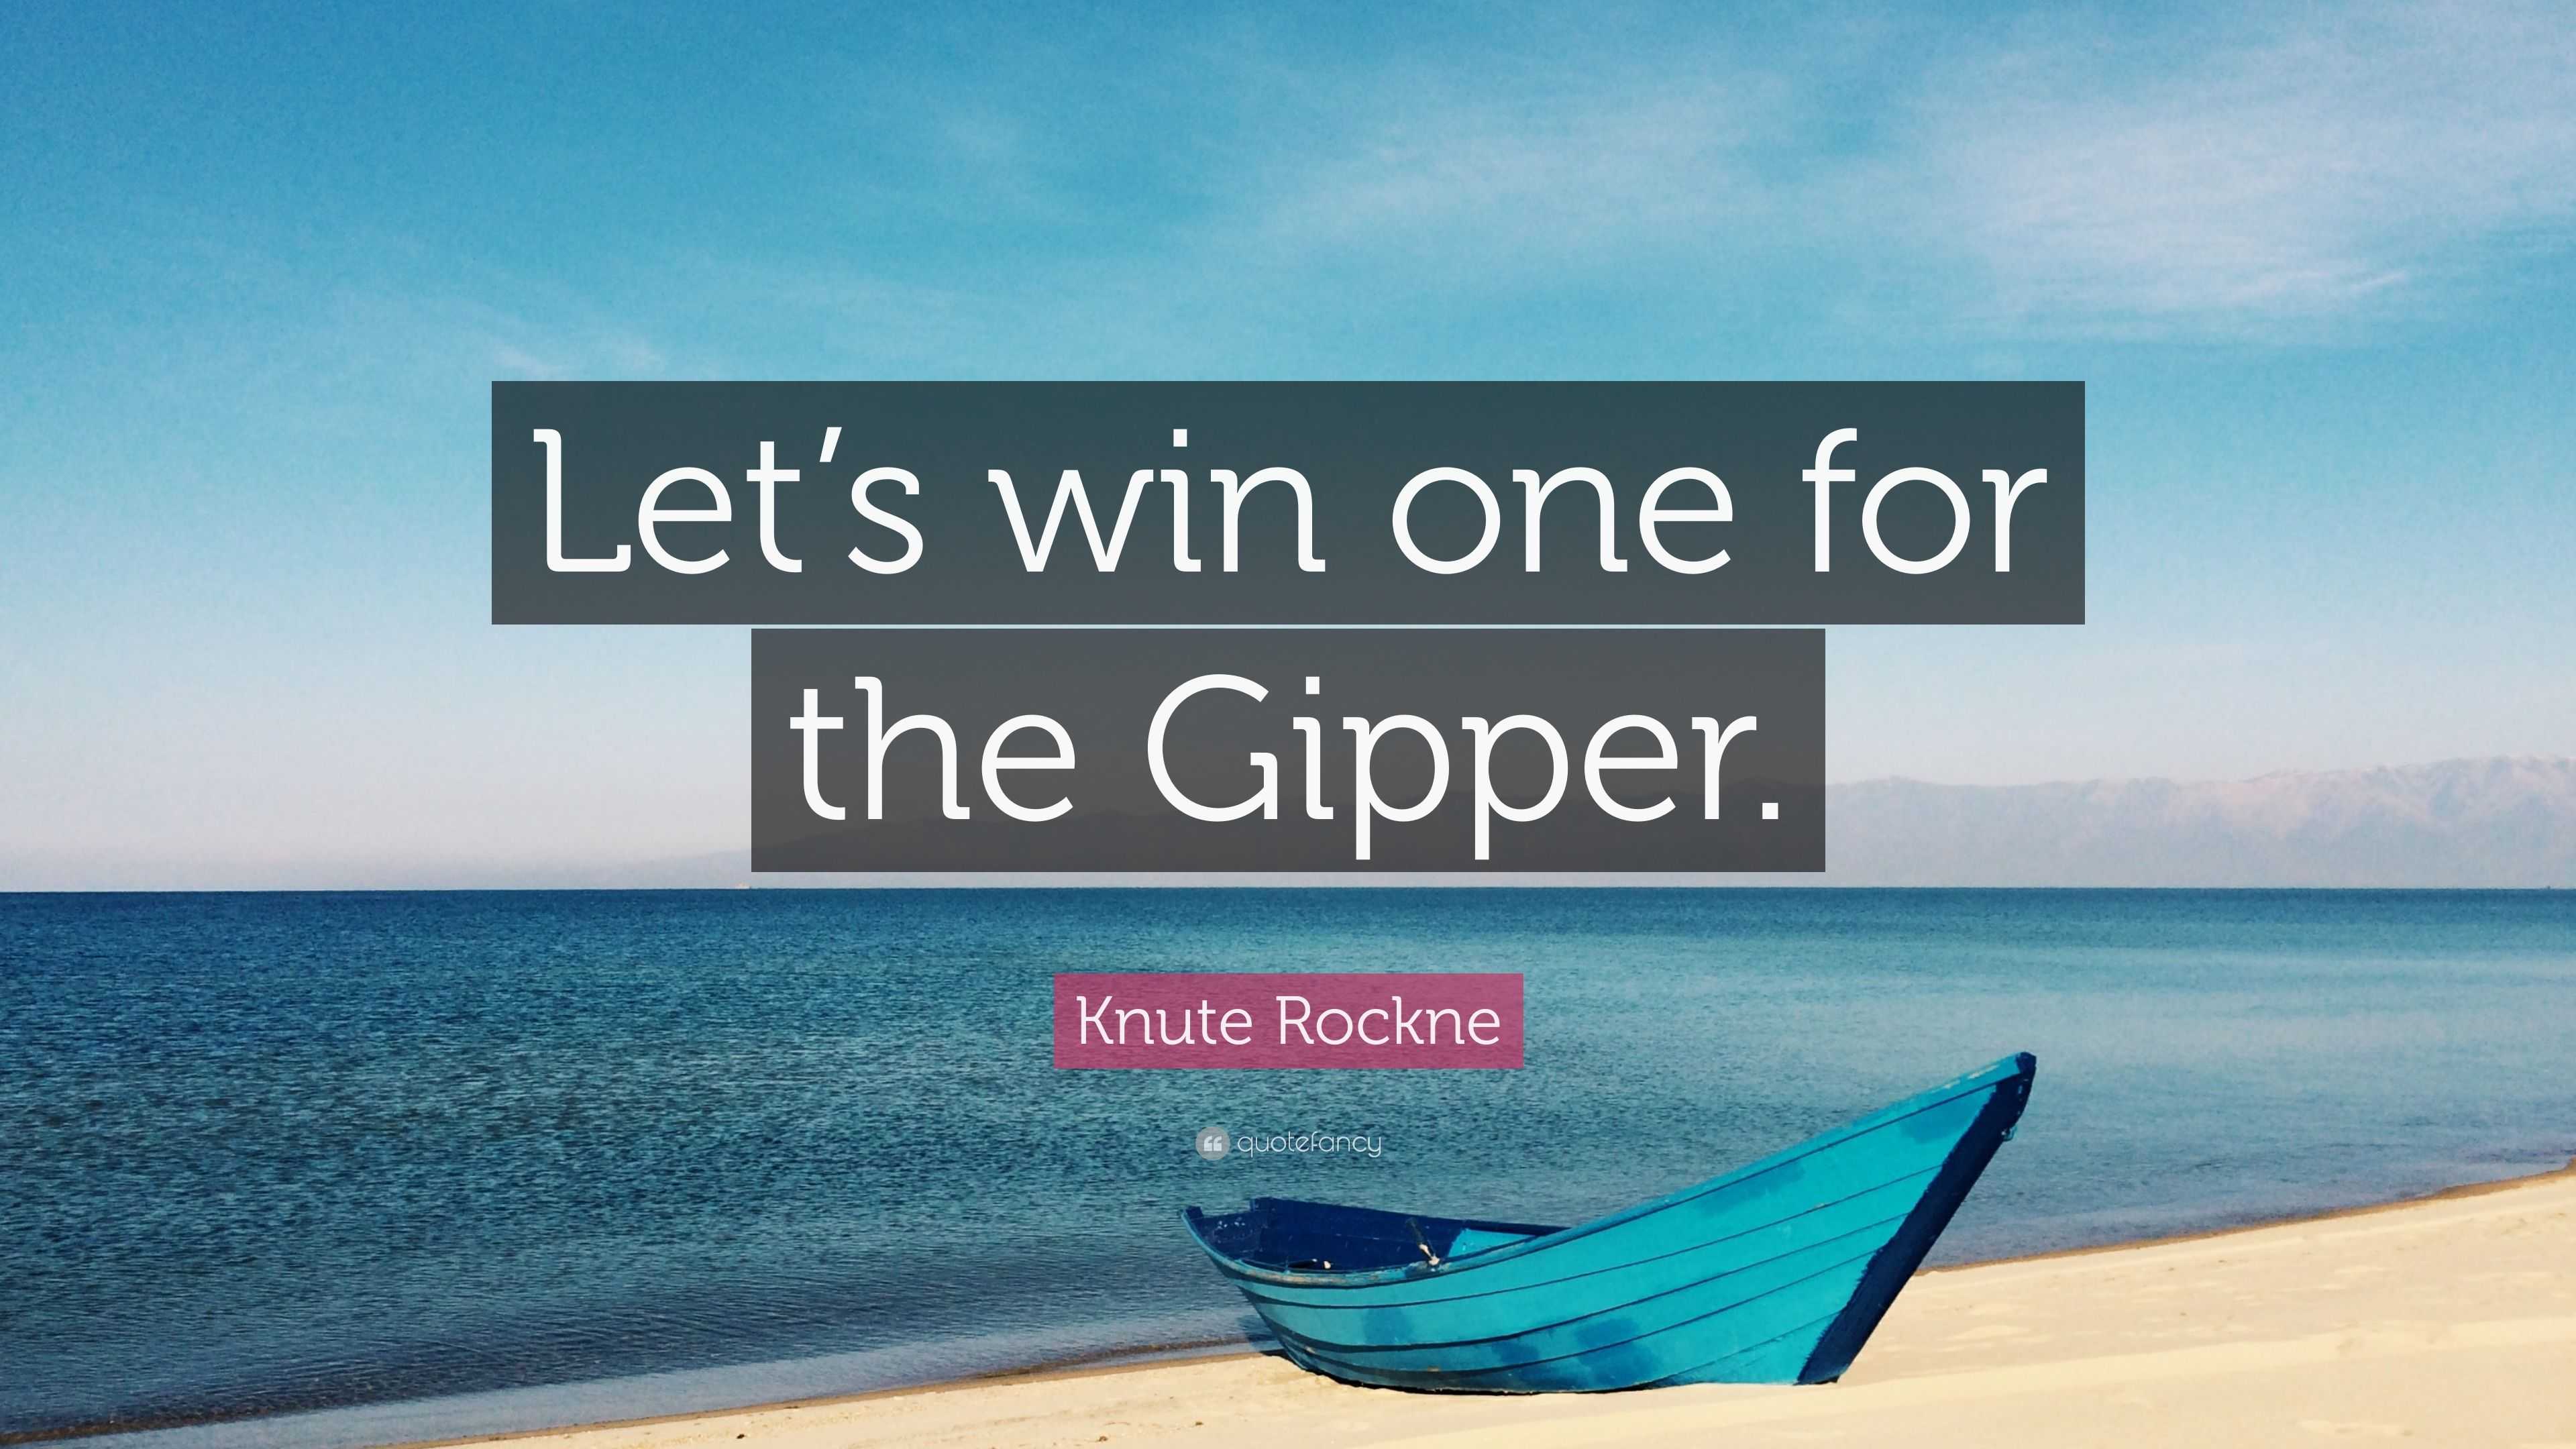 2488857 Knute Rockne Quote Let s win one for the Gipper